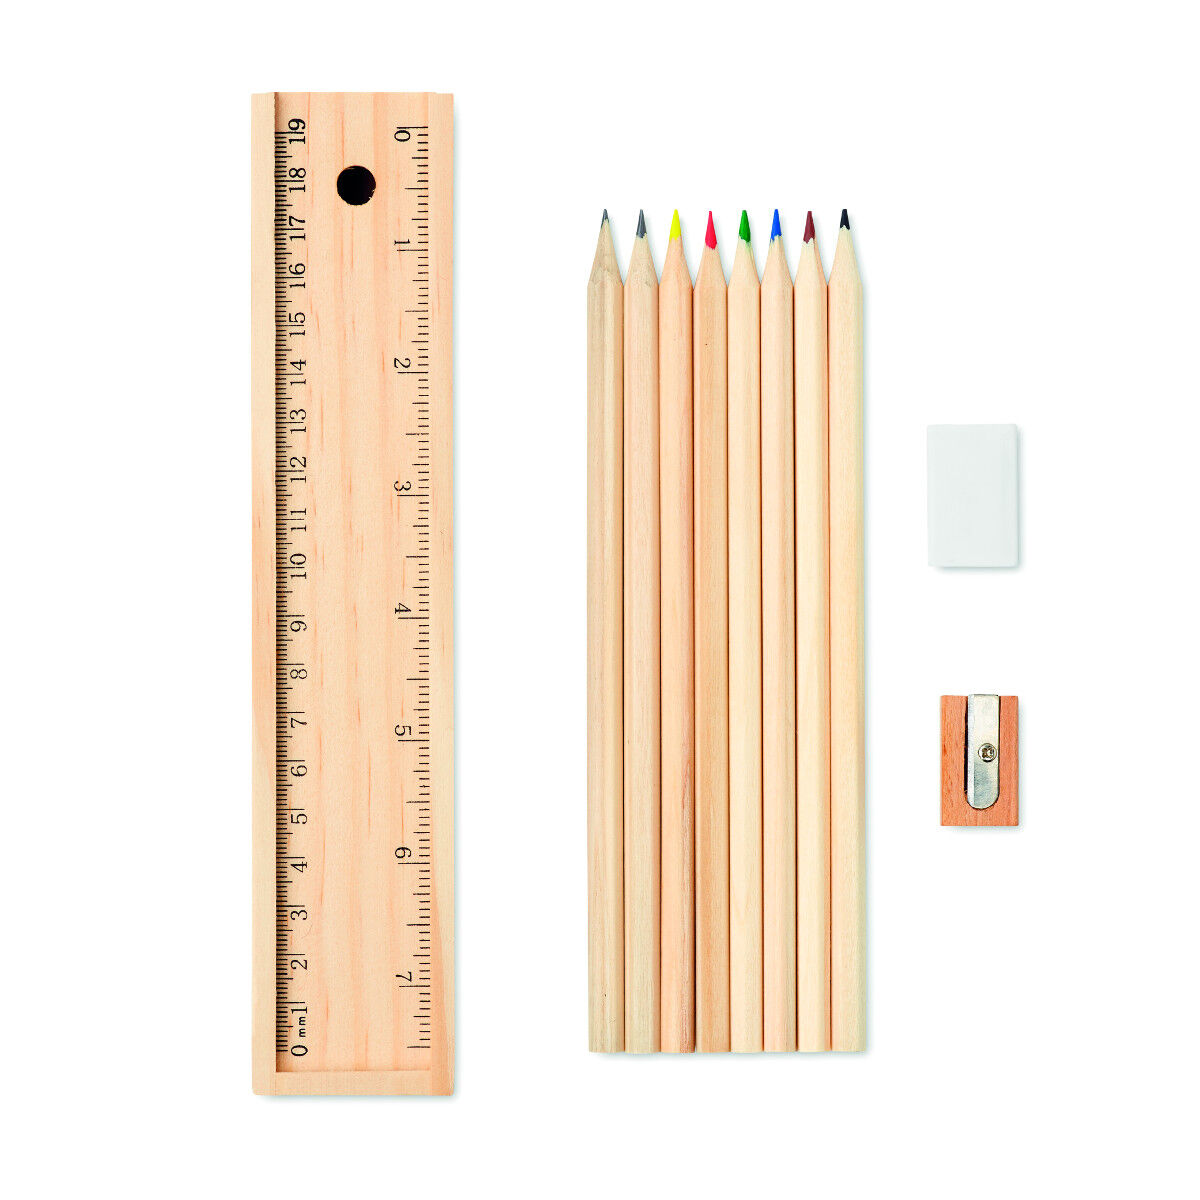 Pencil Set in a Wooden Box